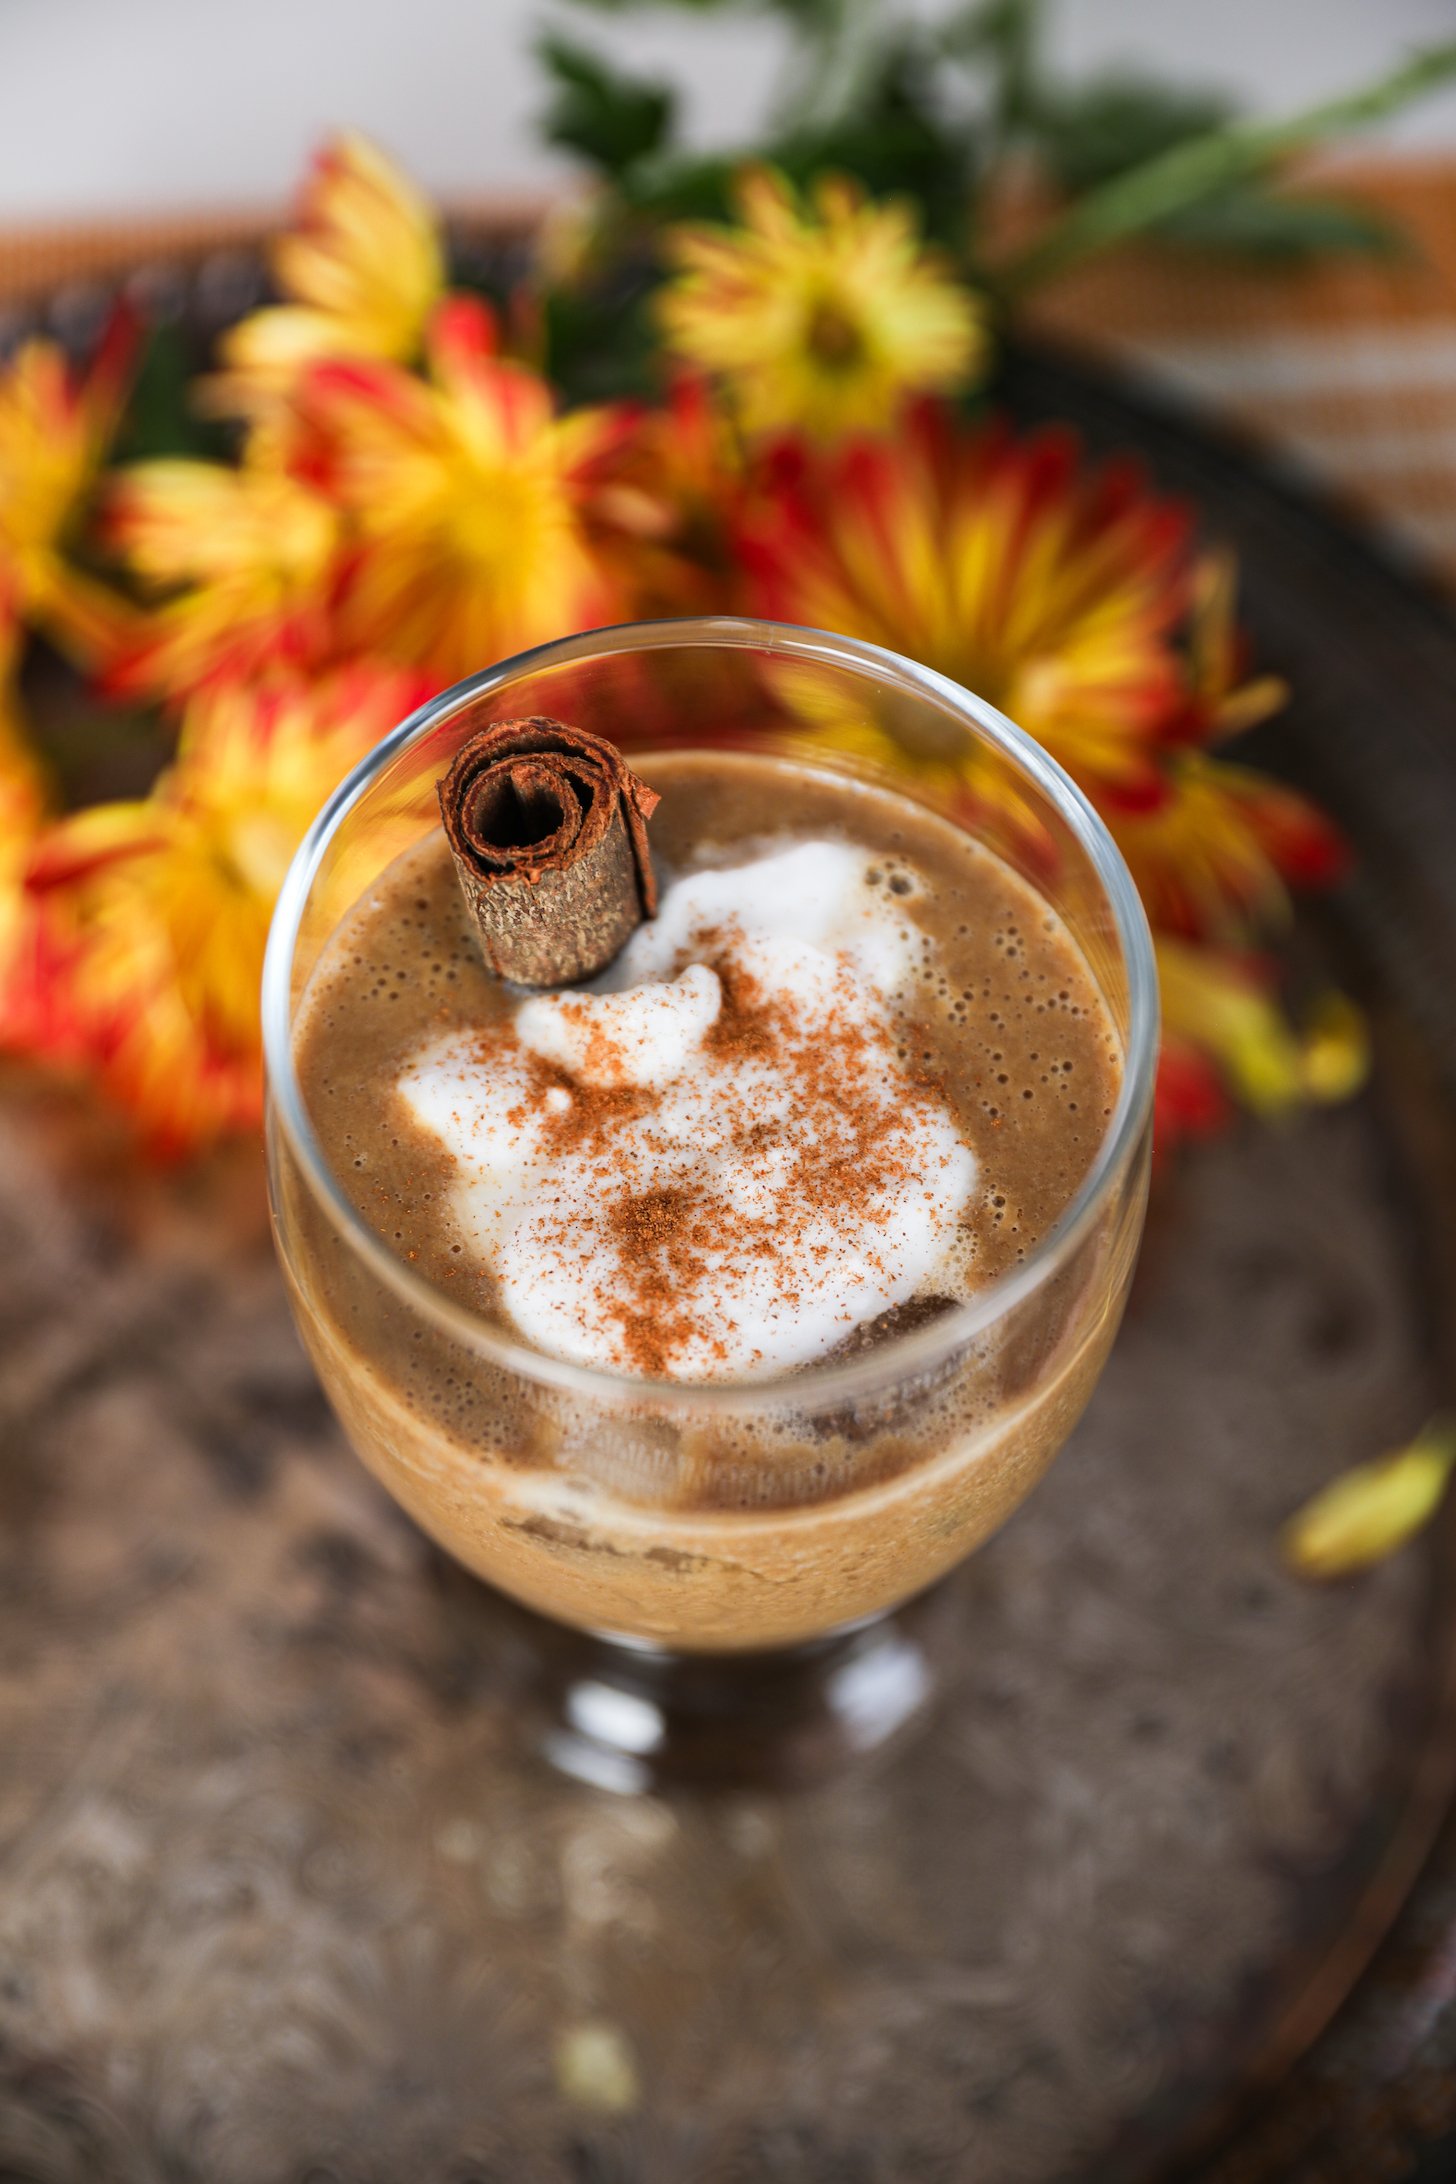 A latte in a glass with cream on top, sprinkled with spice, and a cinnamon stick inside, set against a background of flowers.